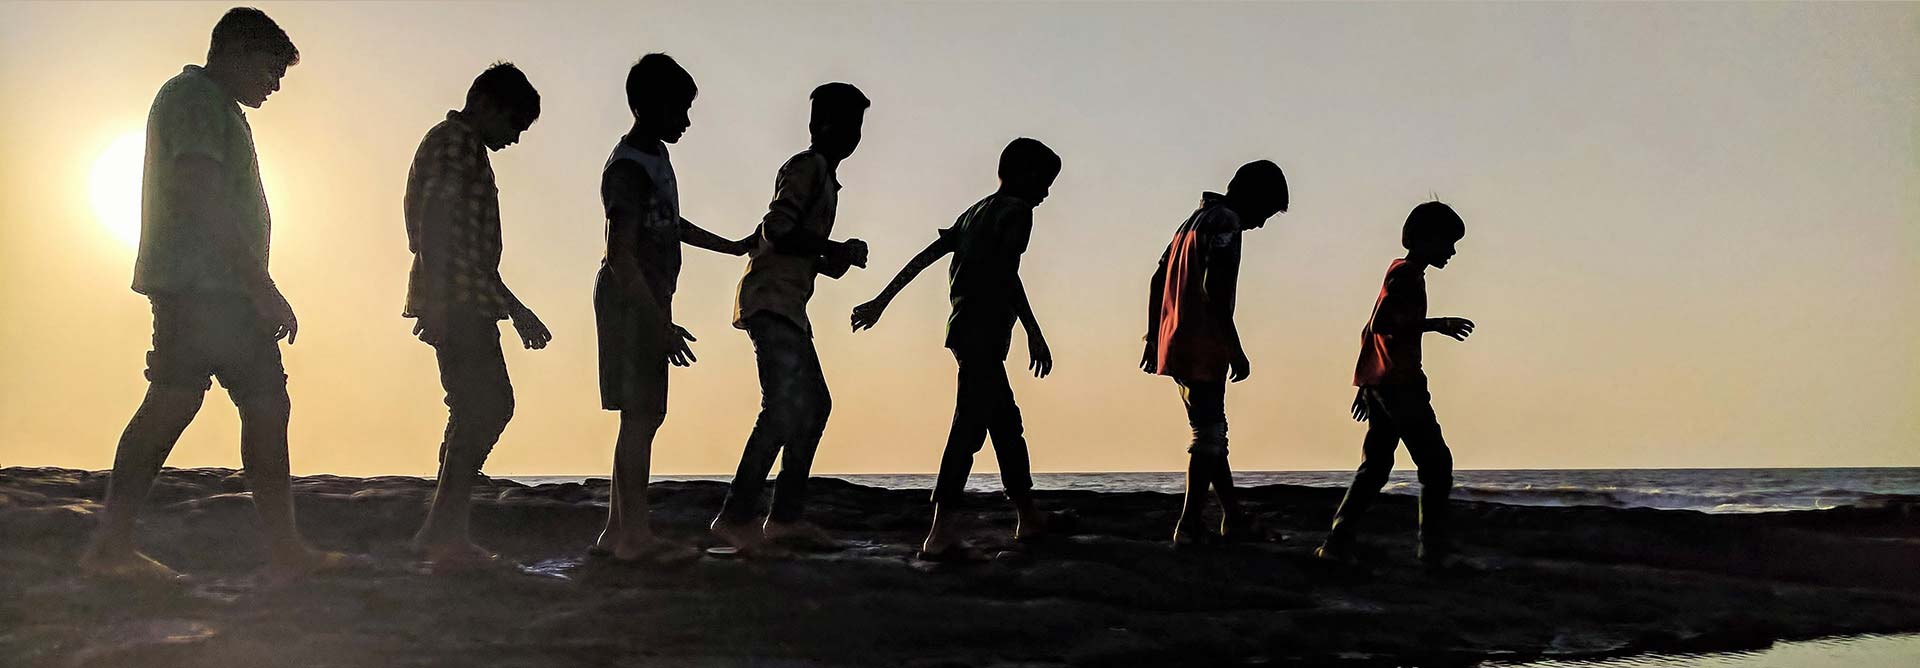 Silhouette of seven boys walking with different postures signifying differing learning preferences